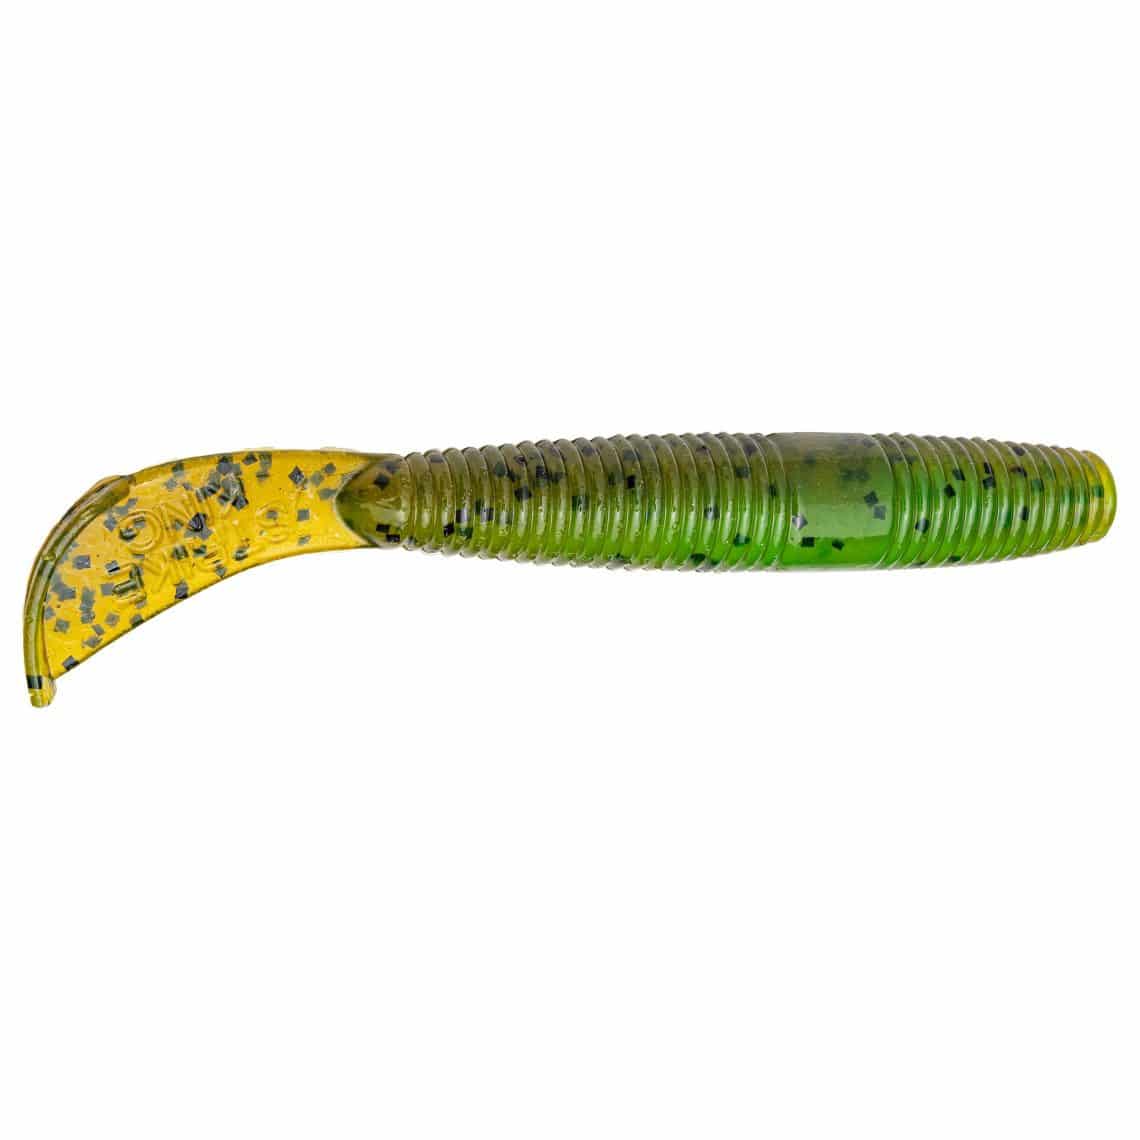 STRIKE KING 3 RAGE NED CUT R WORM 9PK - Northwoods Wholesale Outlet